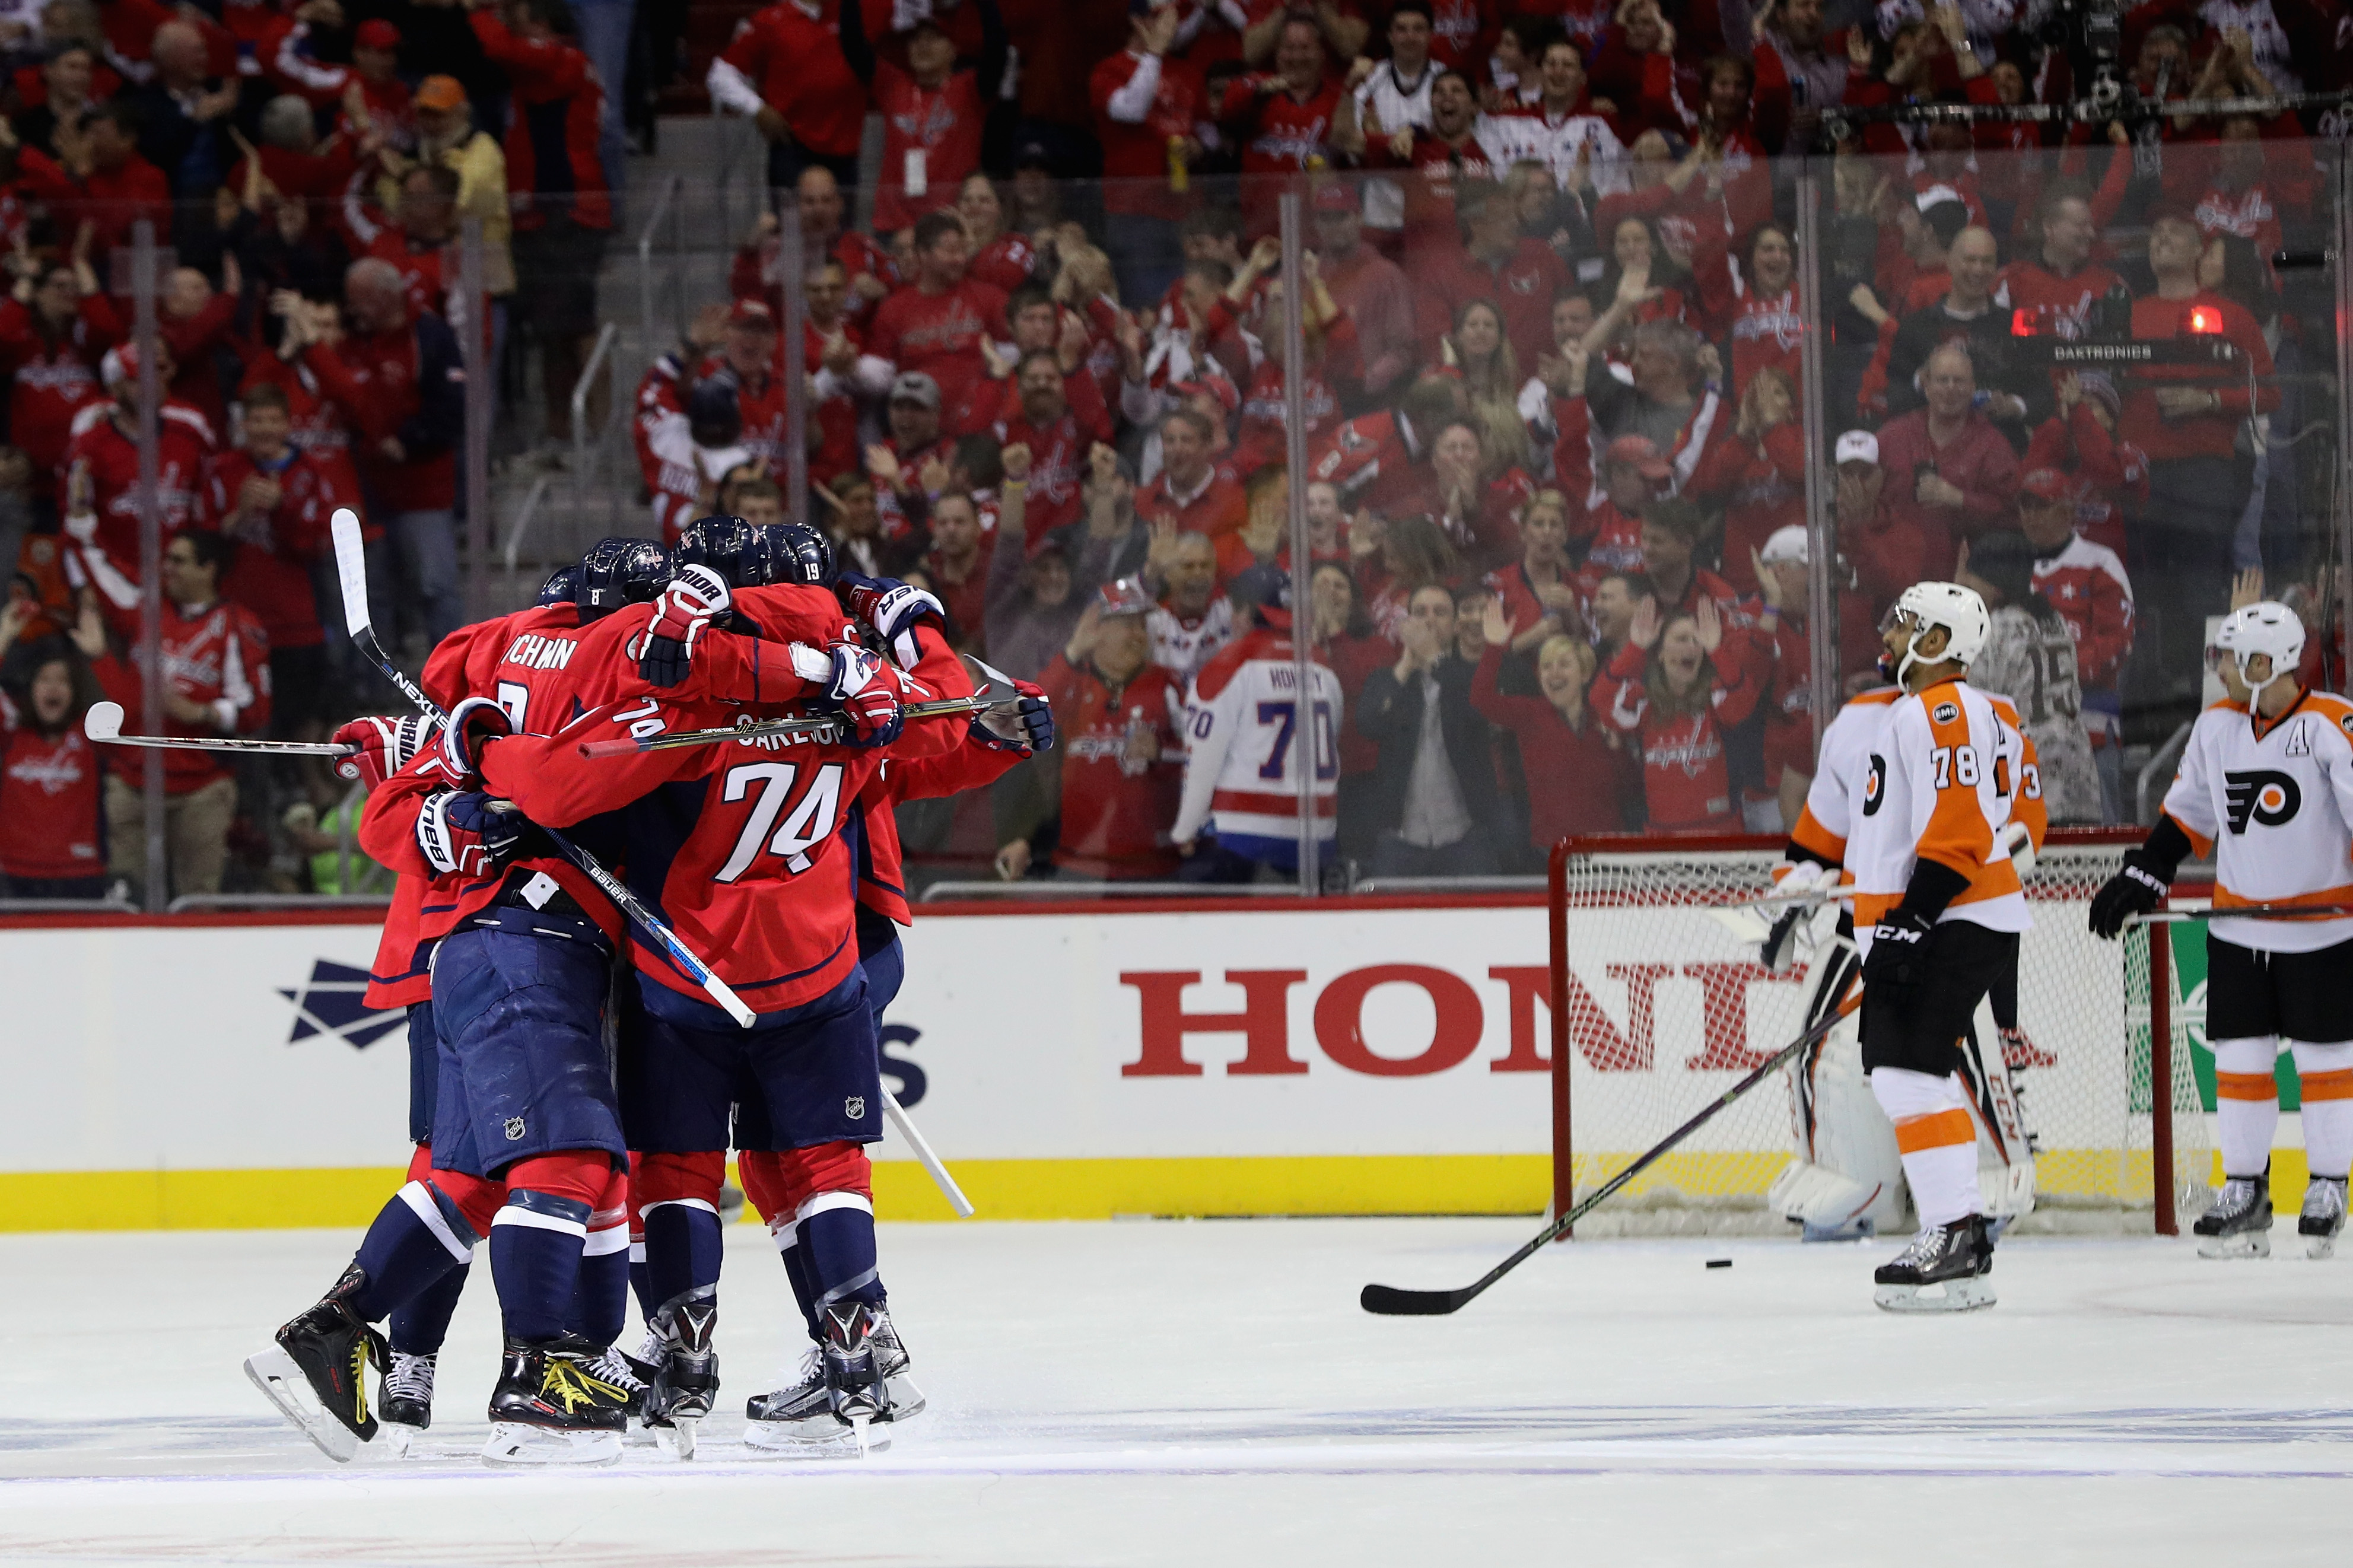 Capitals vs. Flyers, Game 3 Live Stream: How to Watch Online | Heavy.com